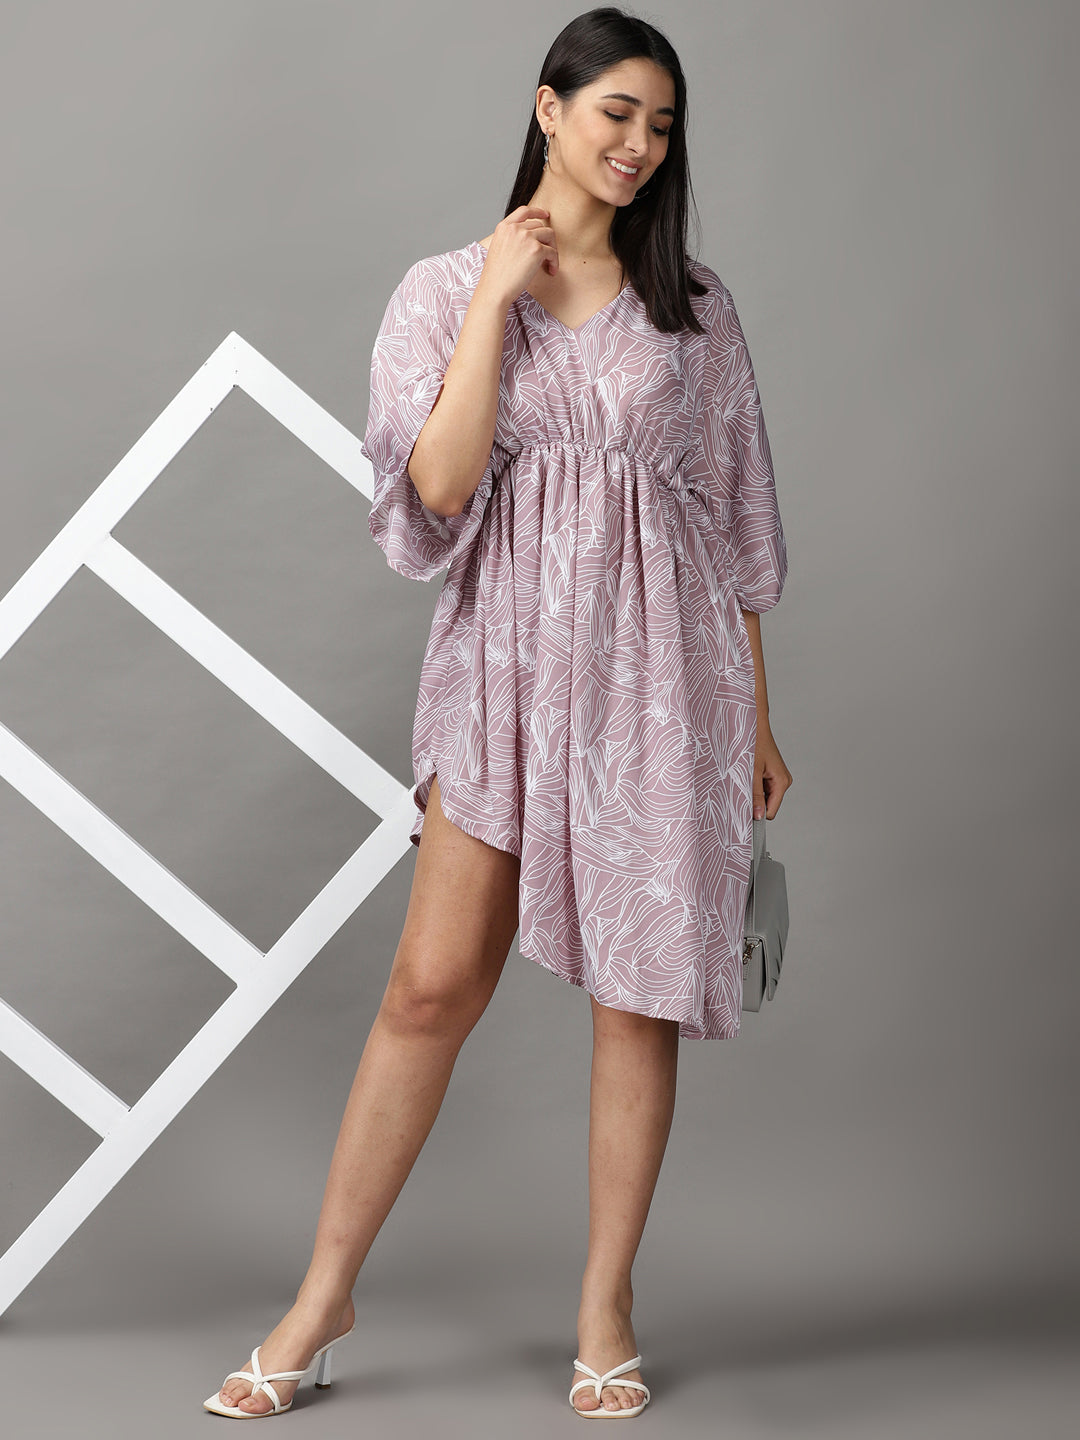 Women's Mauve Printed Fit and Flare Dress